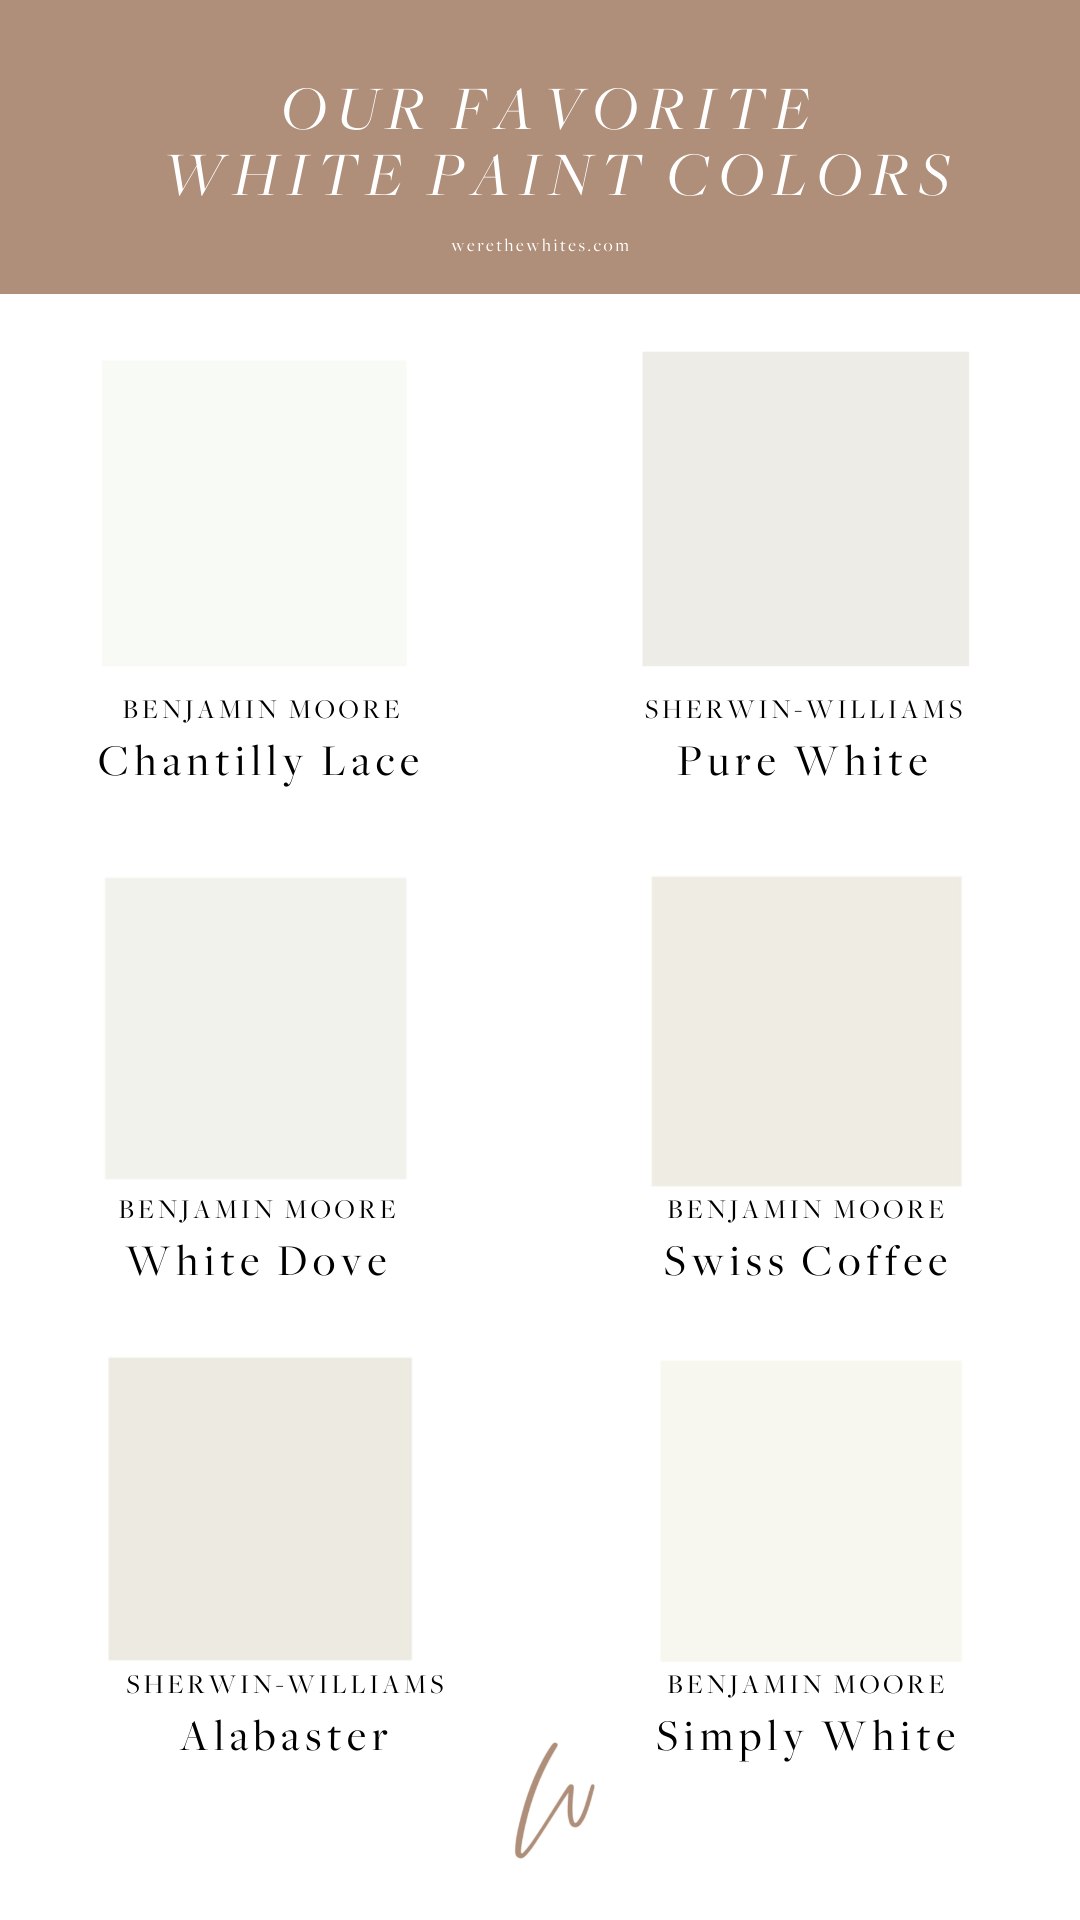 The Best White Paint Colors for Your Home | We're the Whites